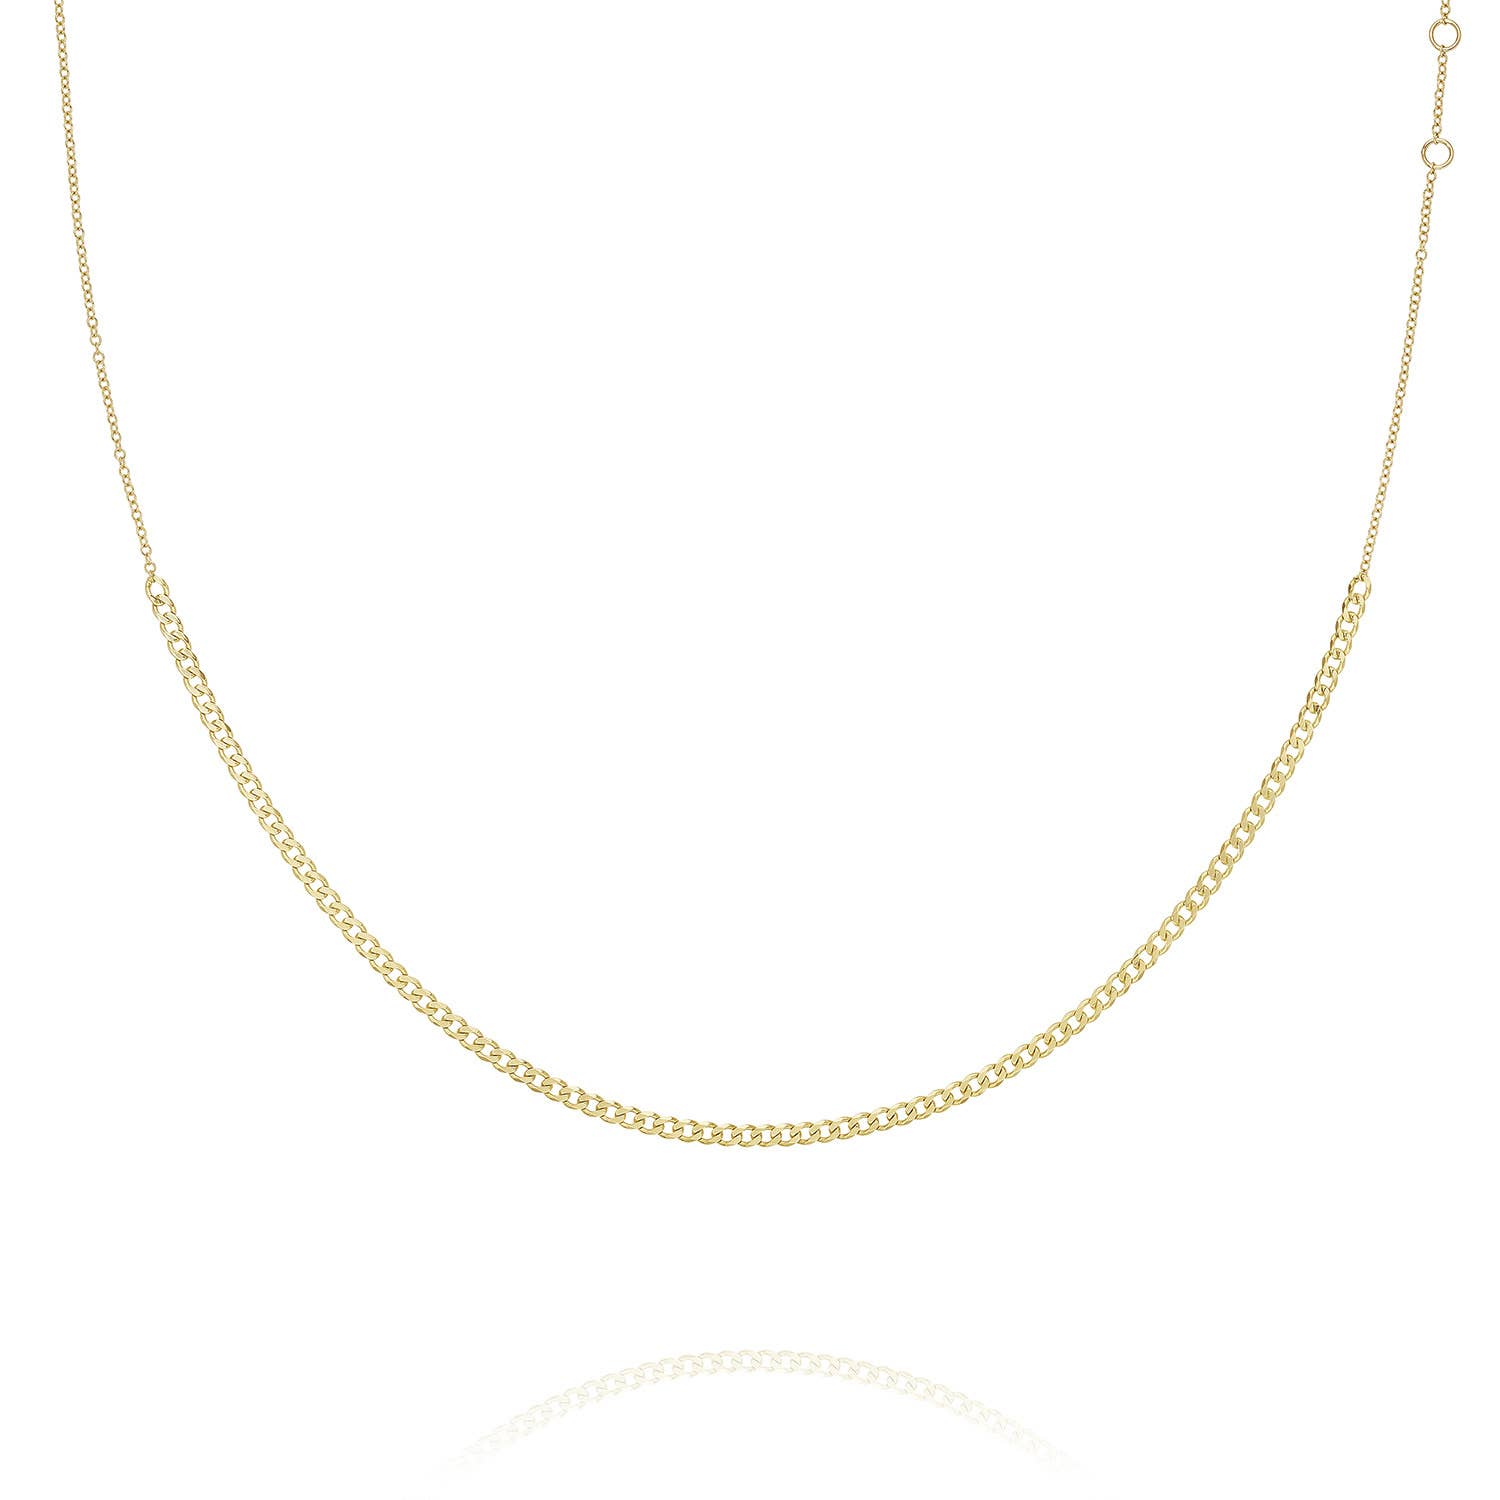 Cutie Curb Link Chain Necklace